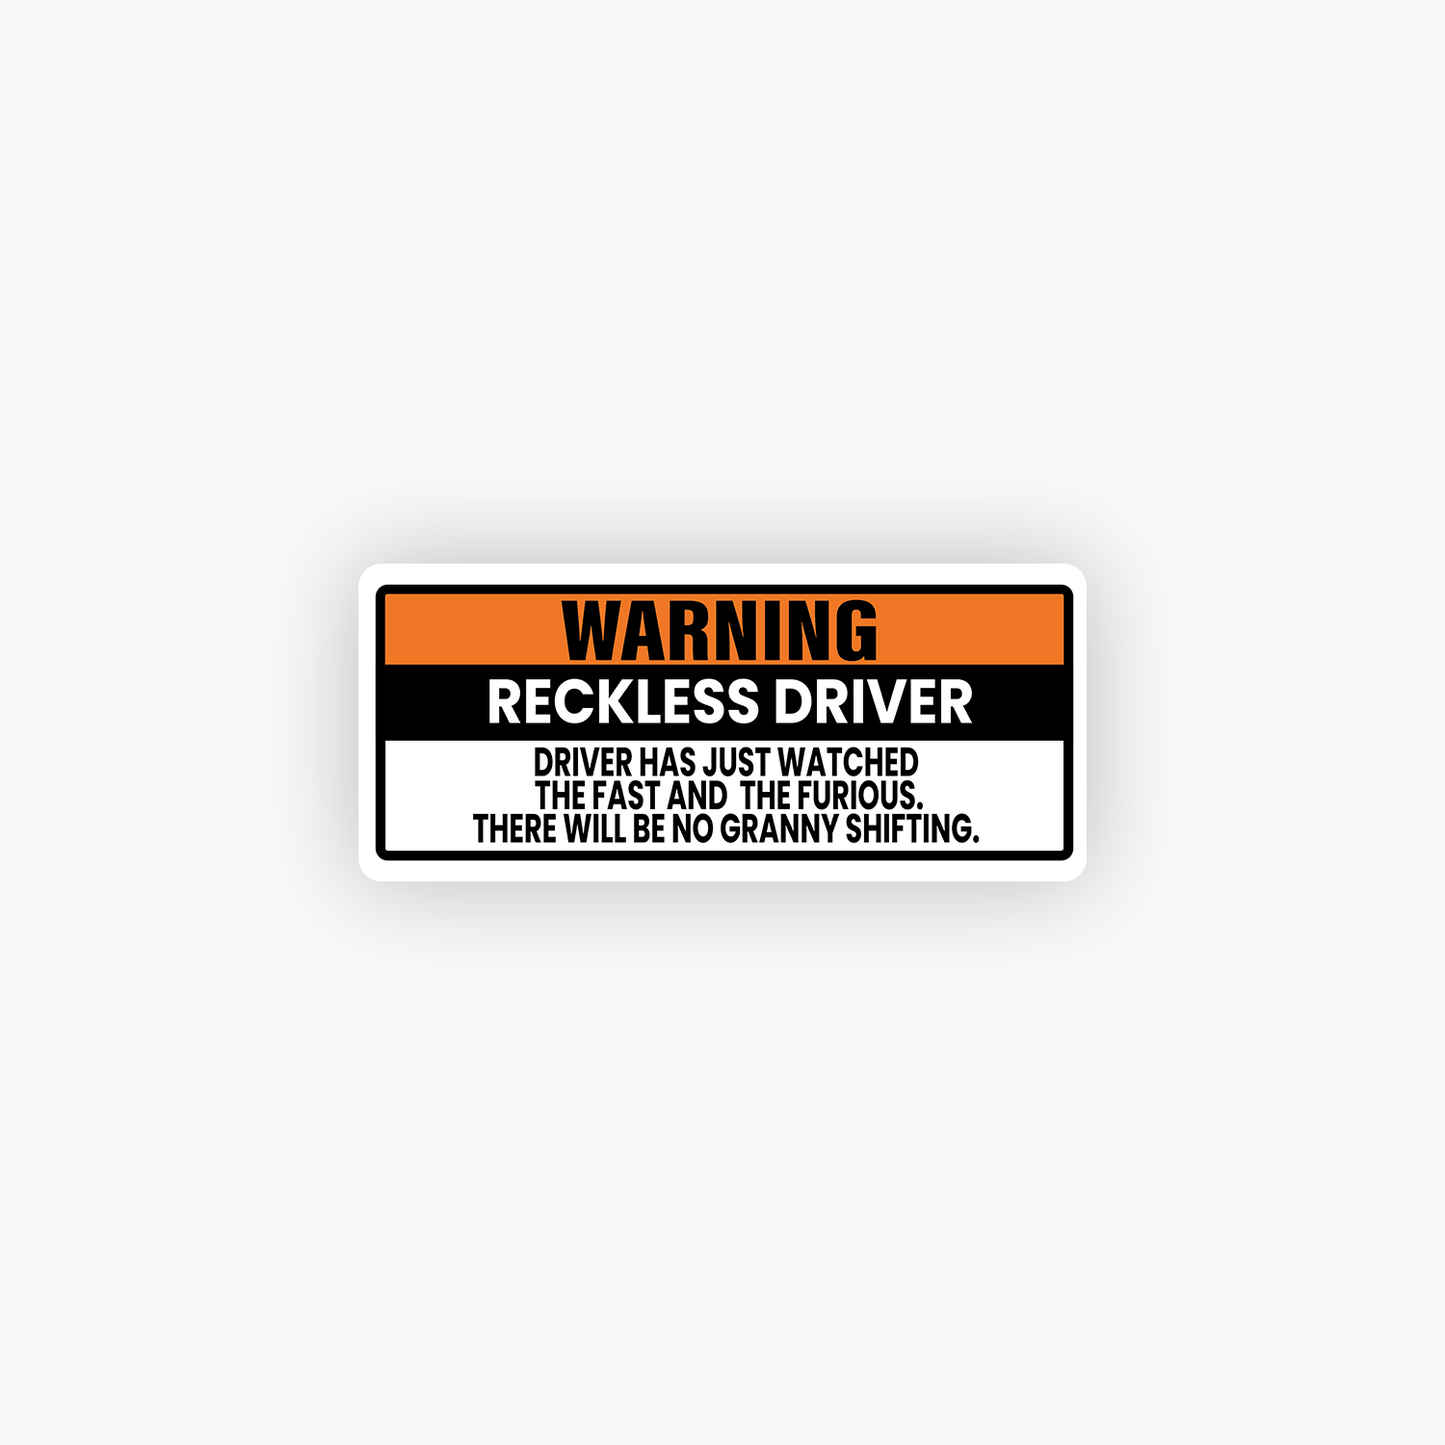 Warning reckless driver